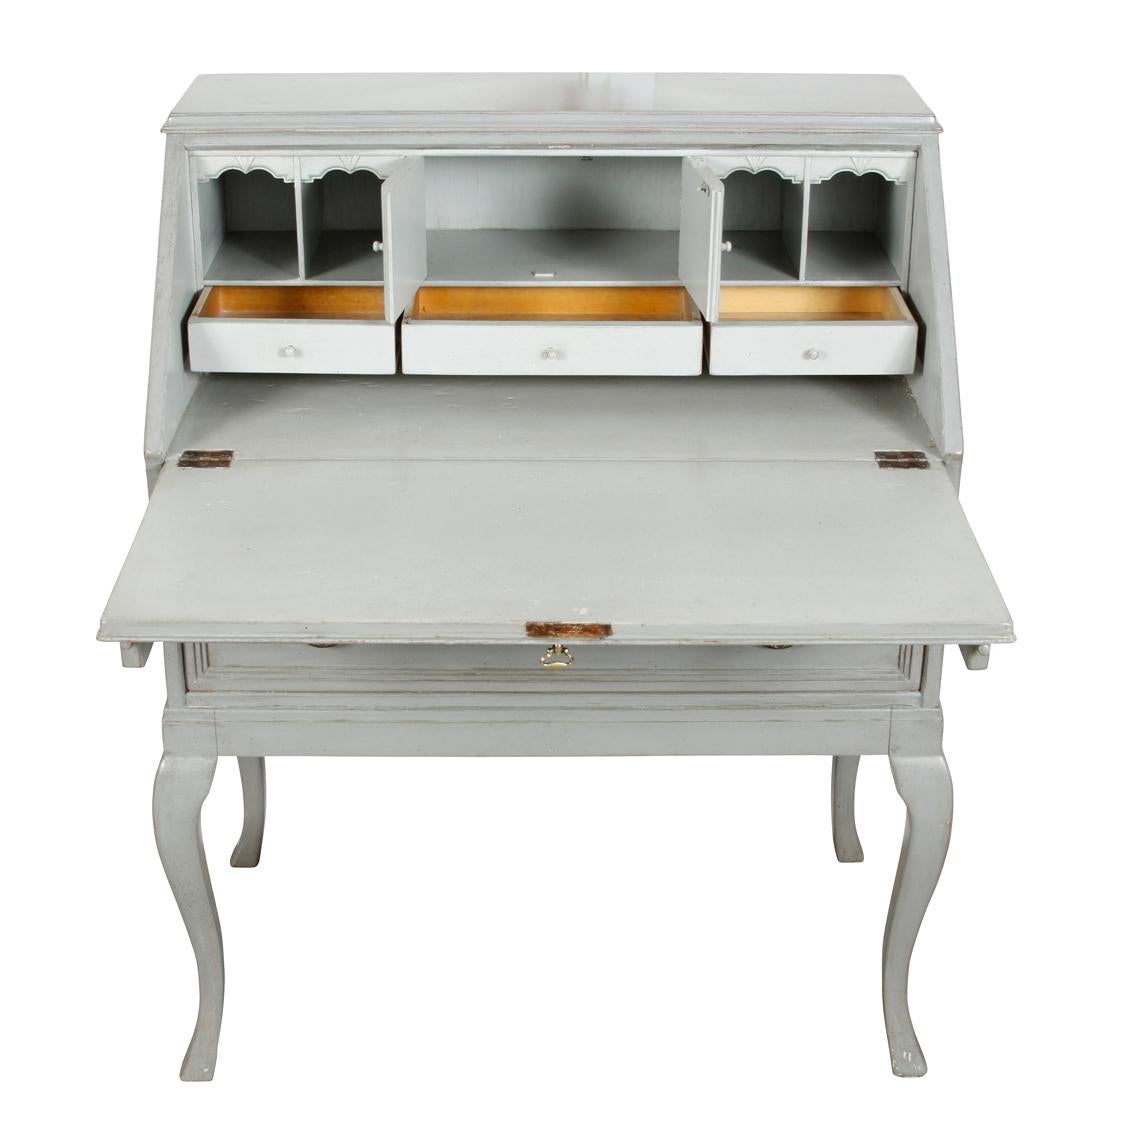 A charming little Gustavian painted slant-top secretary in a lovely bluish gray, featuring an exterior drawer and three small interior drawers below four little storage cubbies, raised on cabriole legs. This little jewel has great style, yet is